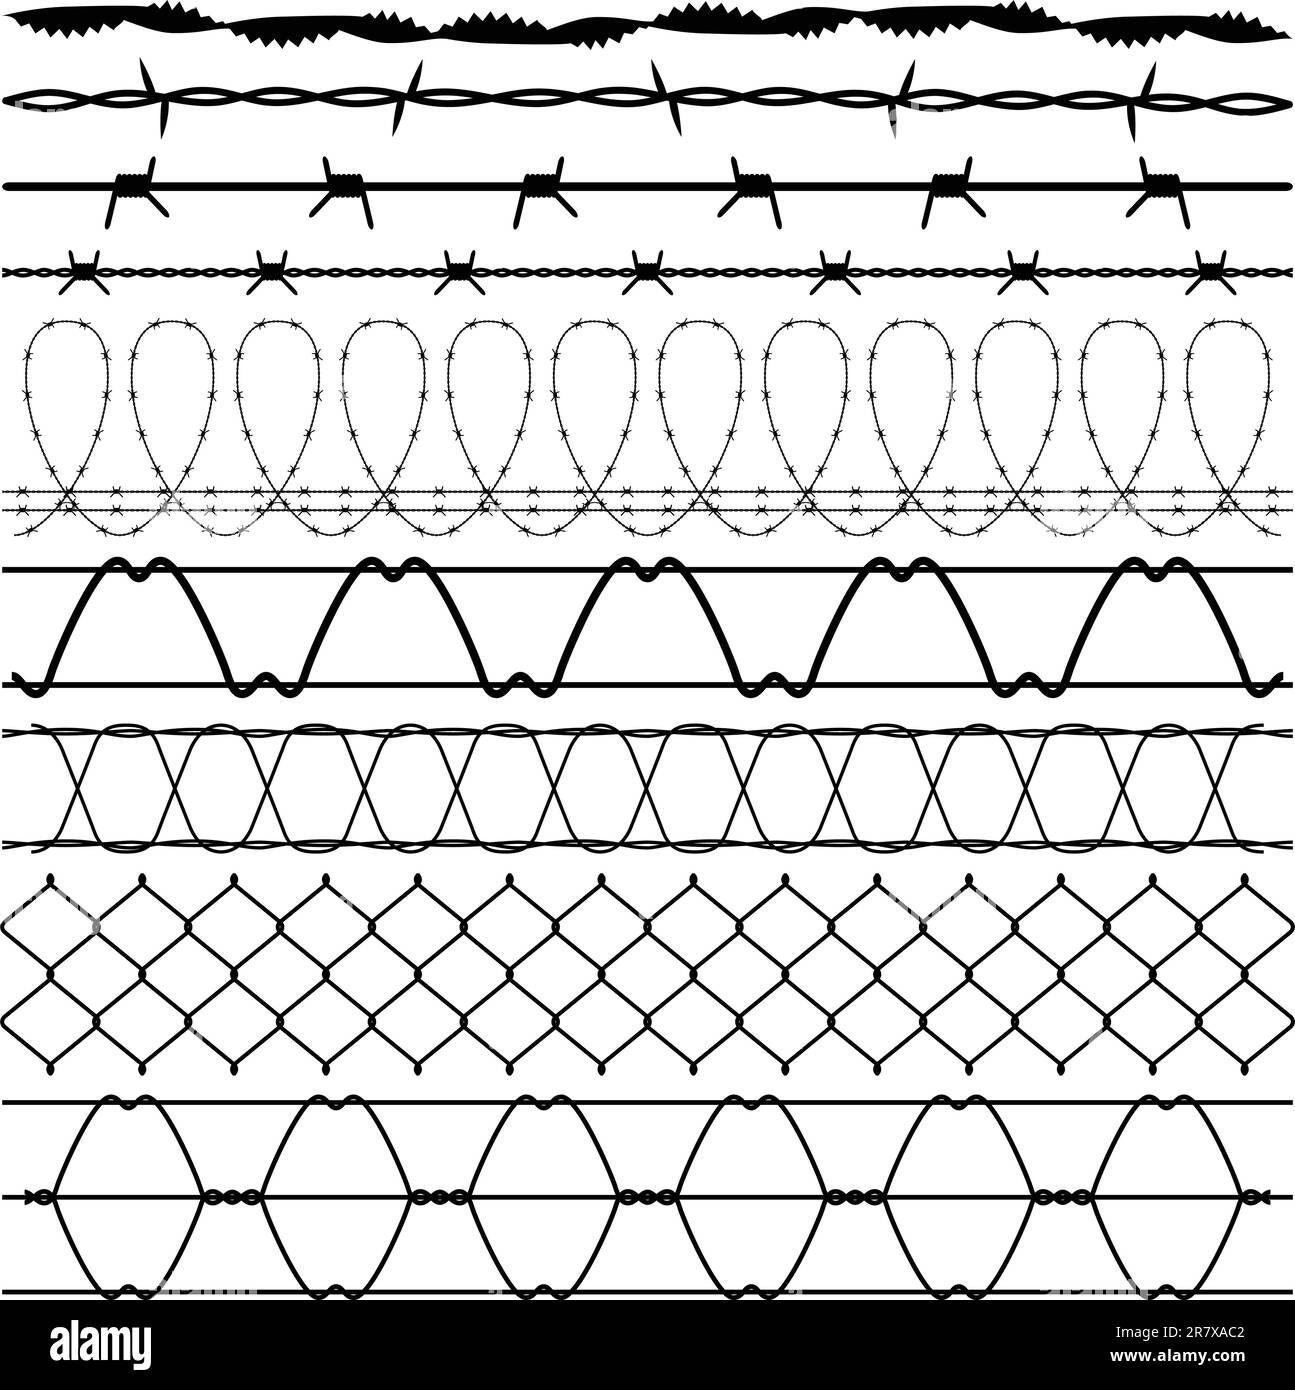 A set of fences and barbed wires design. Stock Vector